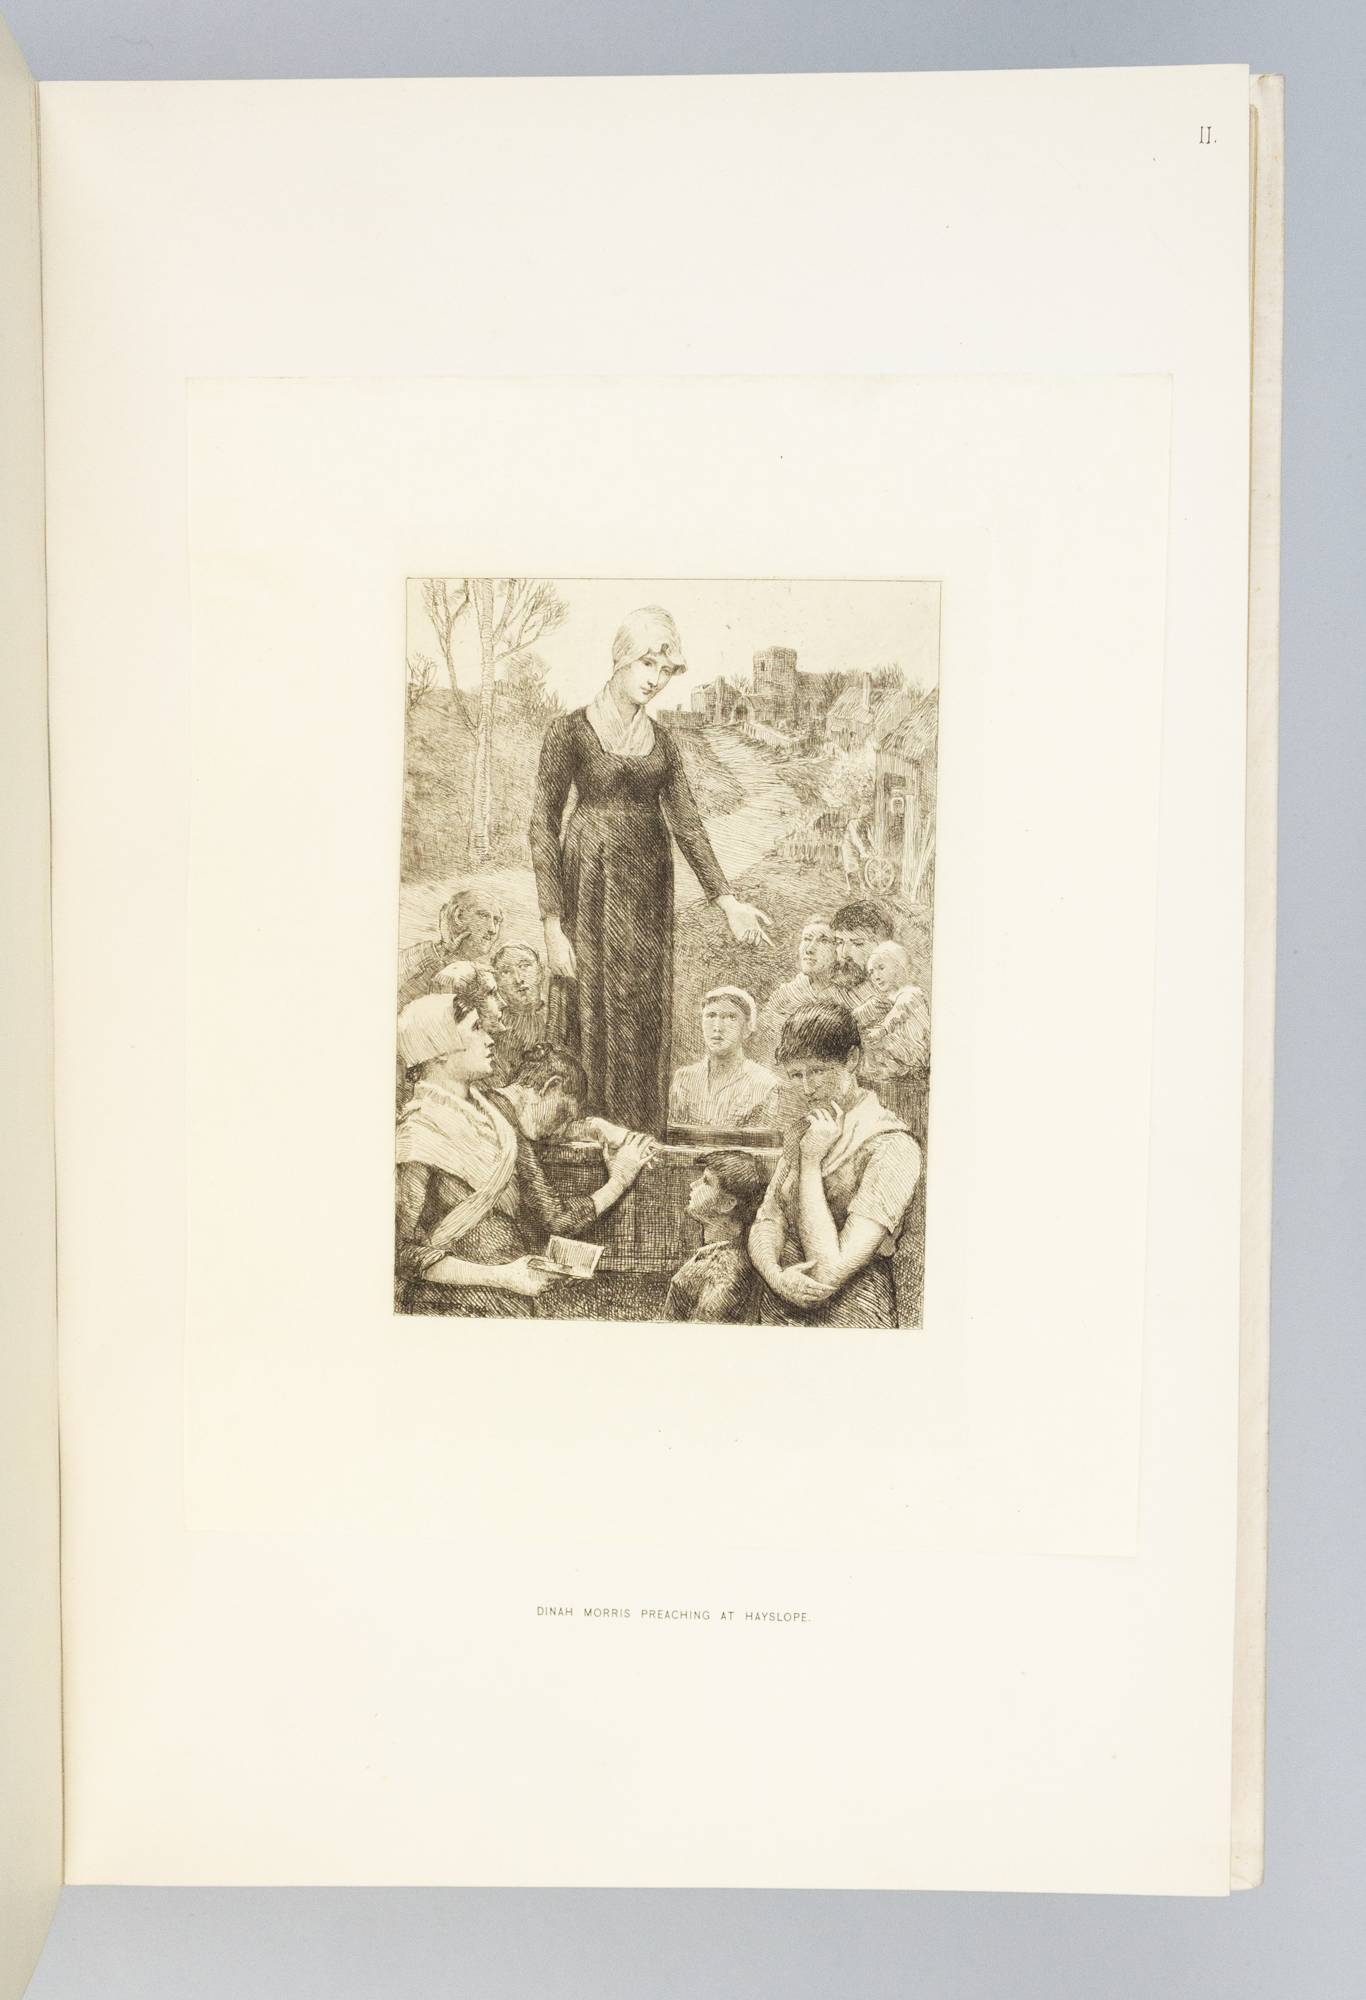 THE GEORGE ELIOT PORTFOLIO, BEING A SERIES OF SIXTY JAPANESE PAPER PROOFS  FROM ORIGINAL ETCHINGS AND PHOTO-ETCHINGS ILLUSTRATING GEORGE ELIOT'S WORKS  ...